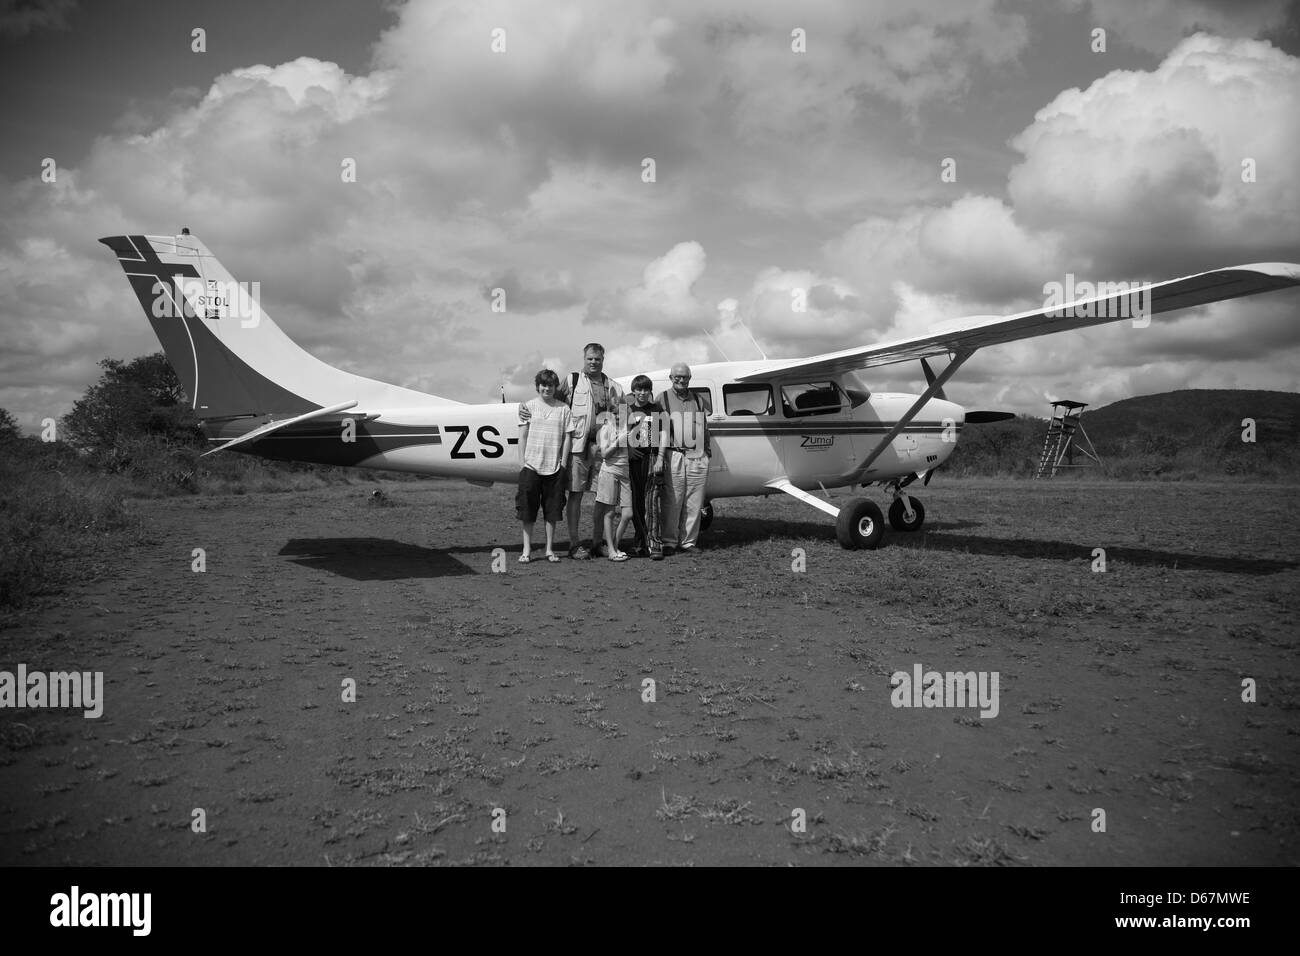 Family in front of a small plane in a game reserve Stock Photo